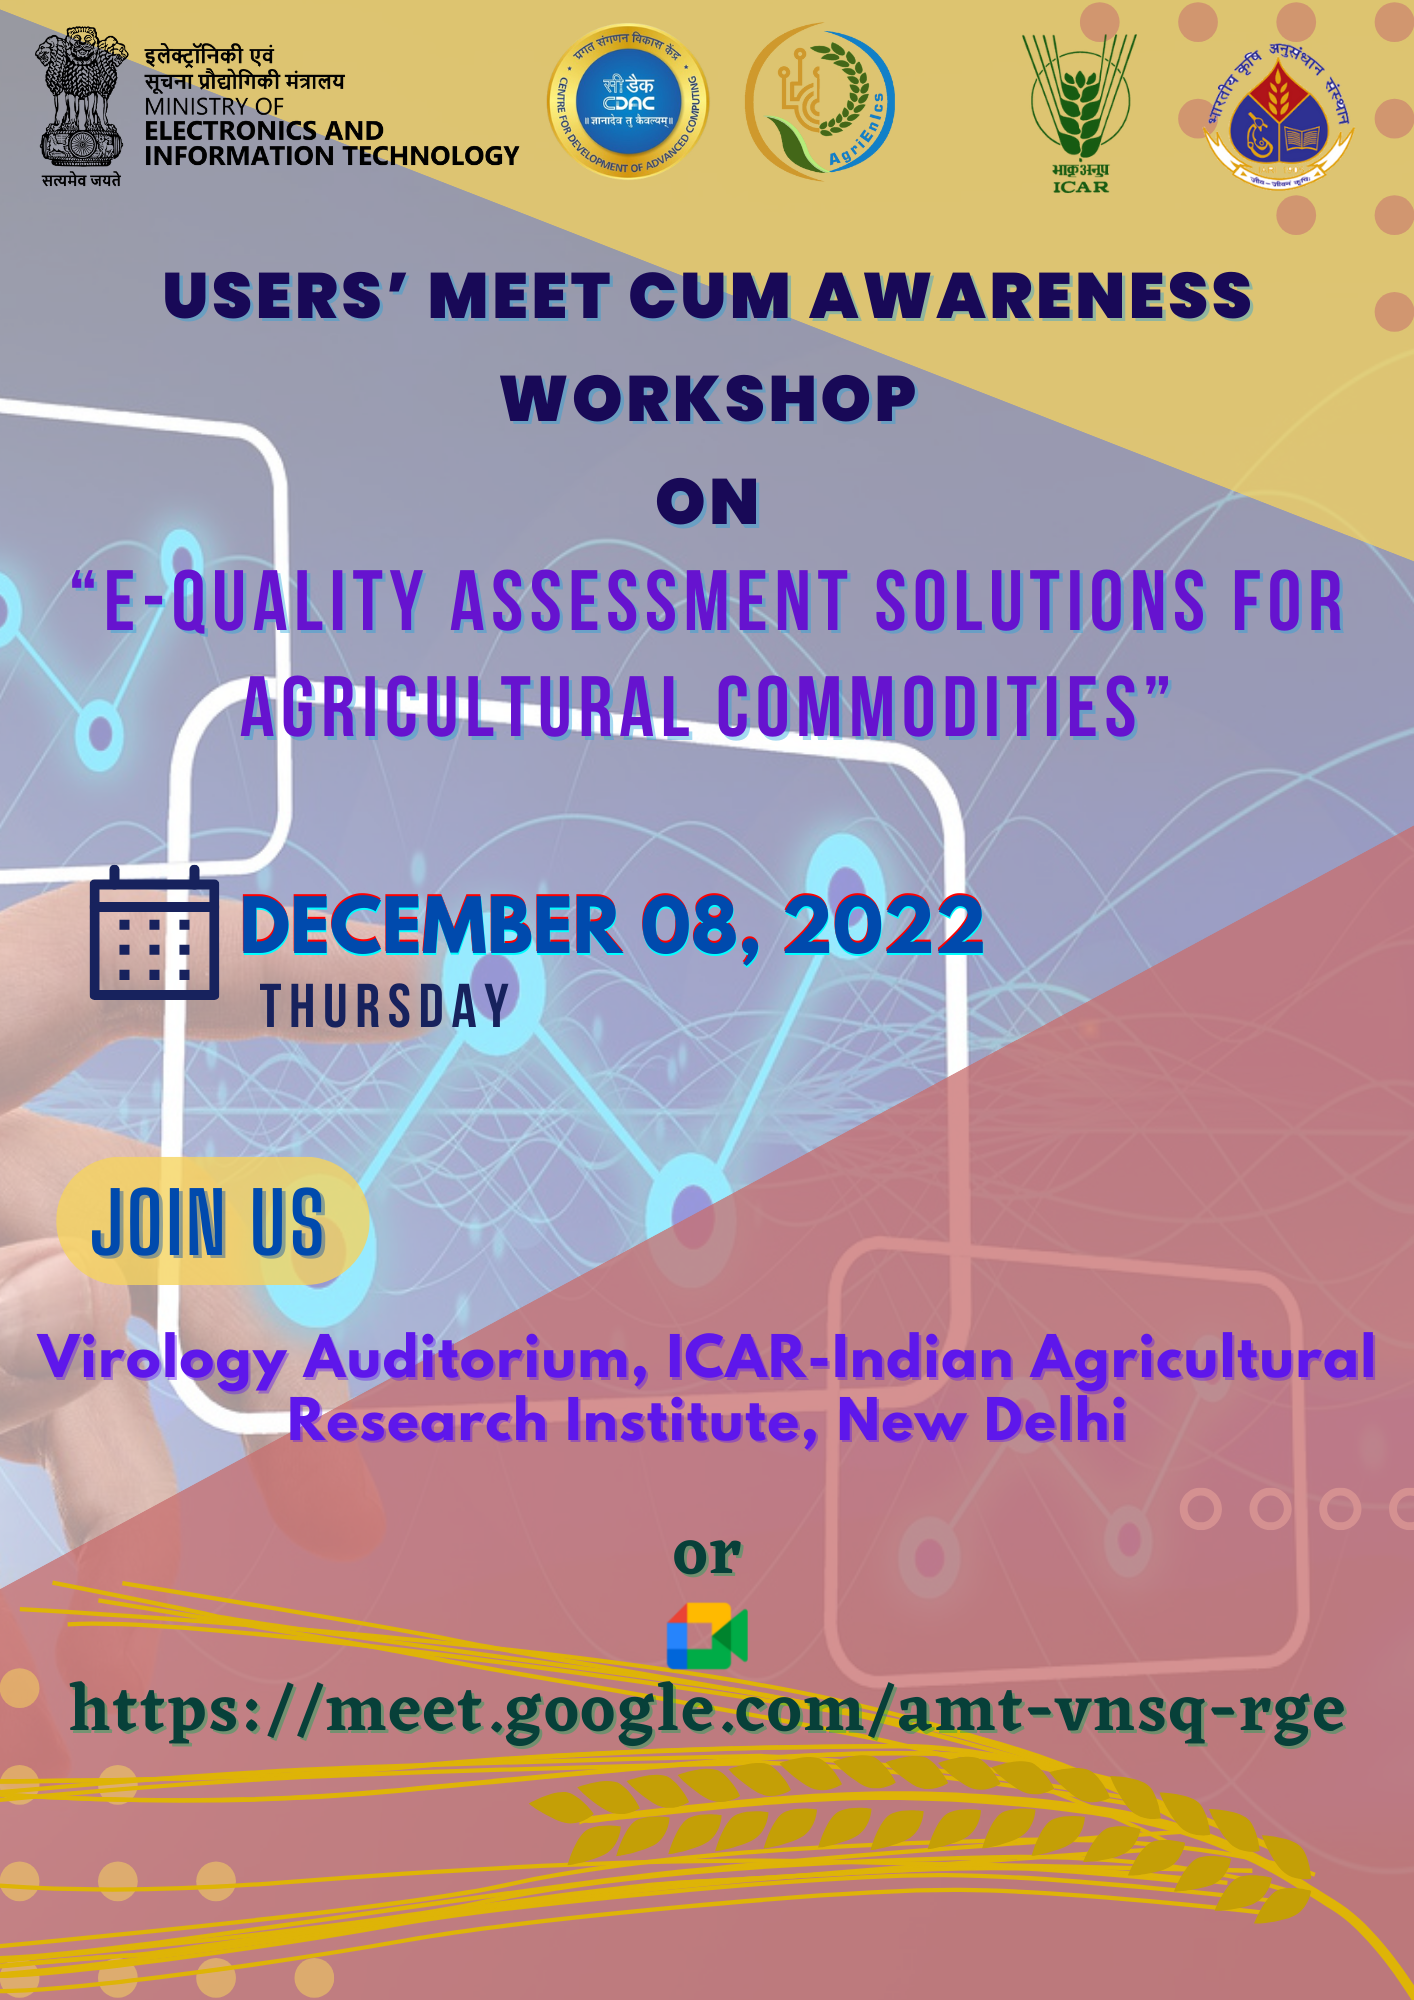 E-Quality Assessment Solutions for Agricultural Commodities, December 08, 2022